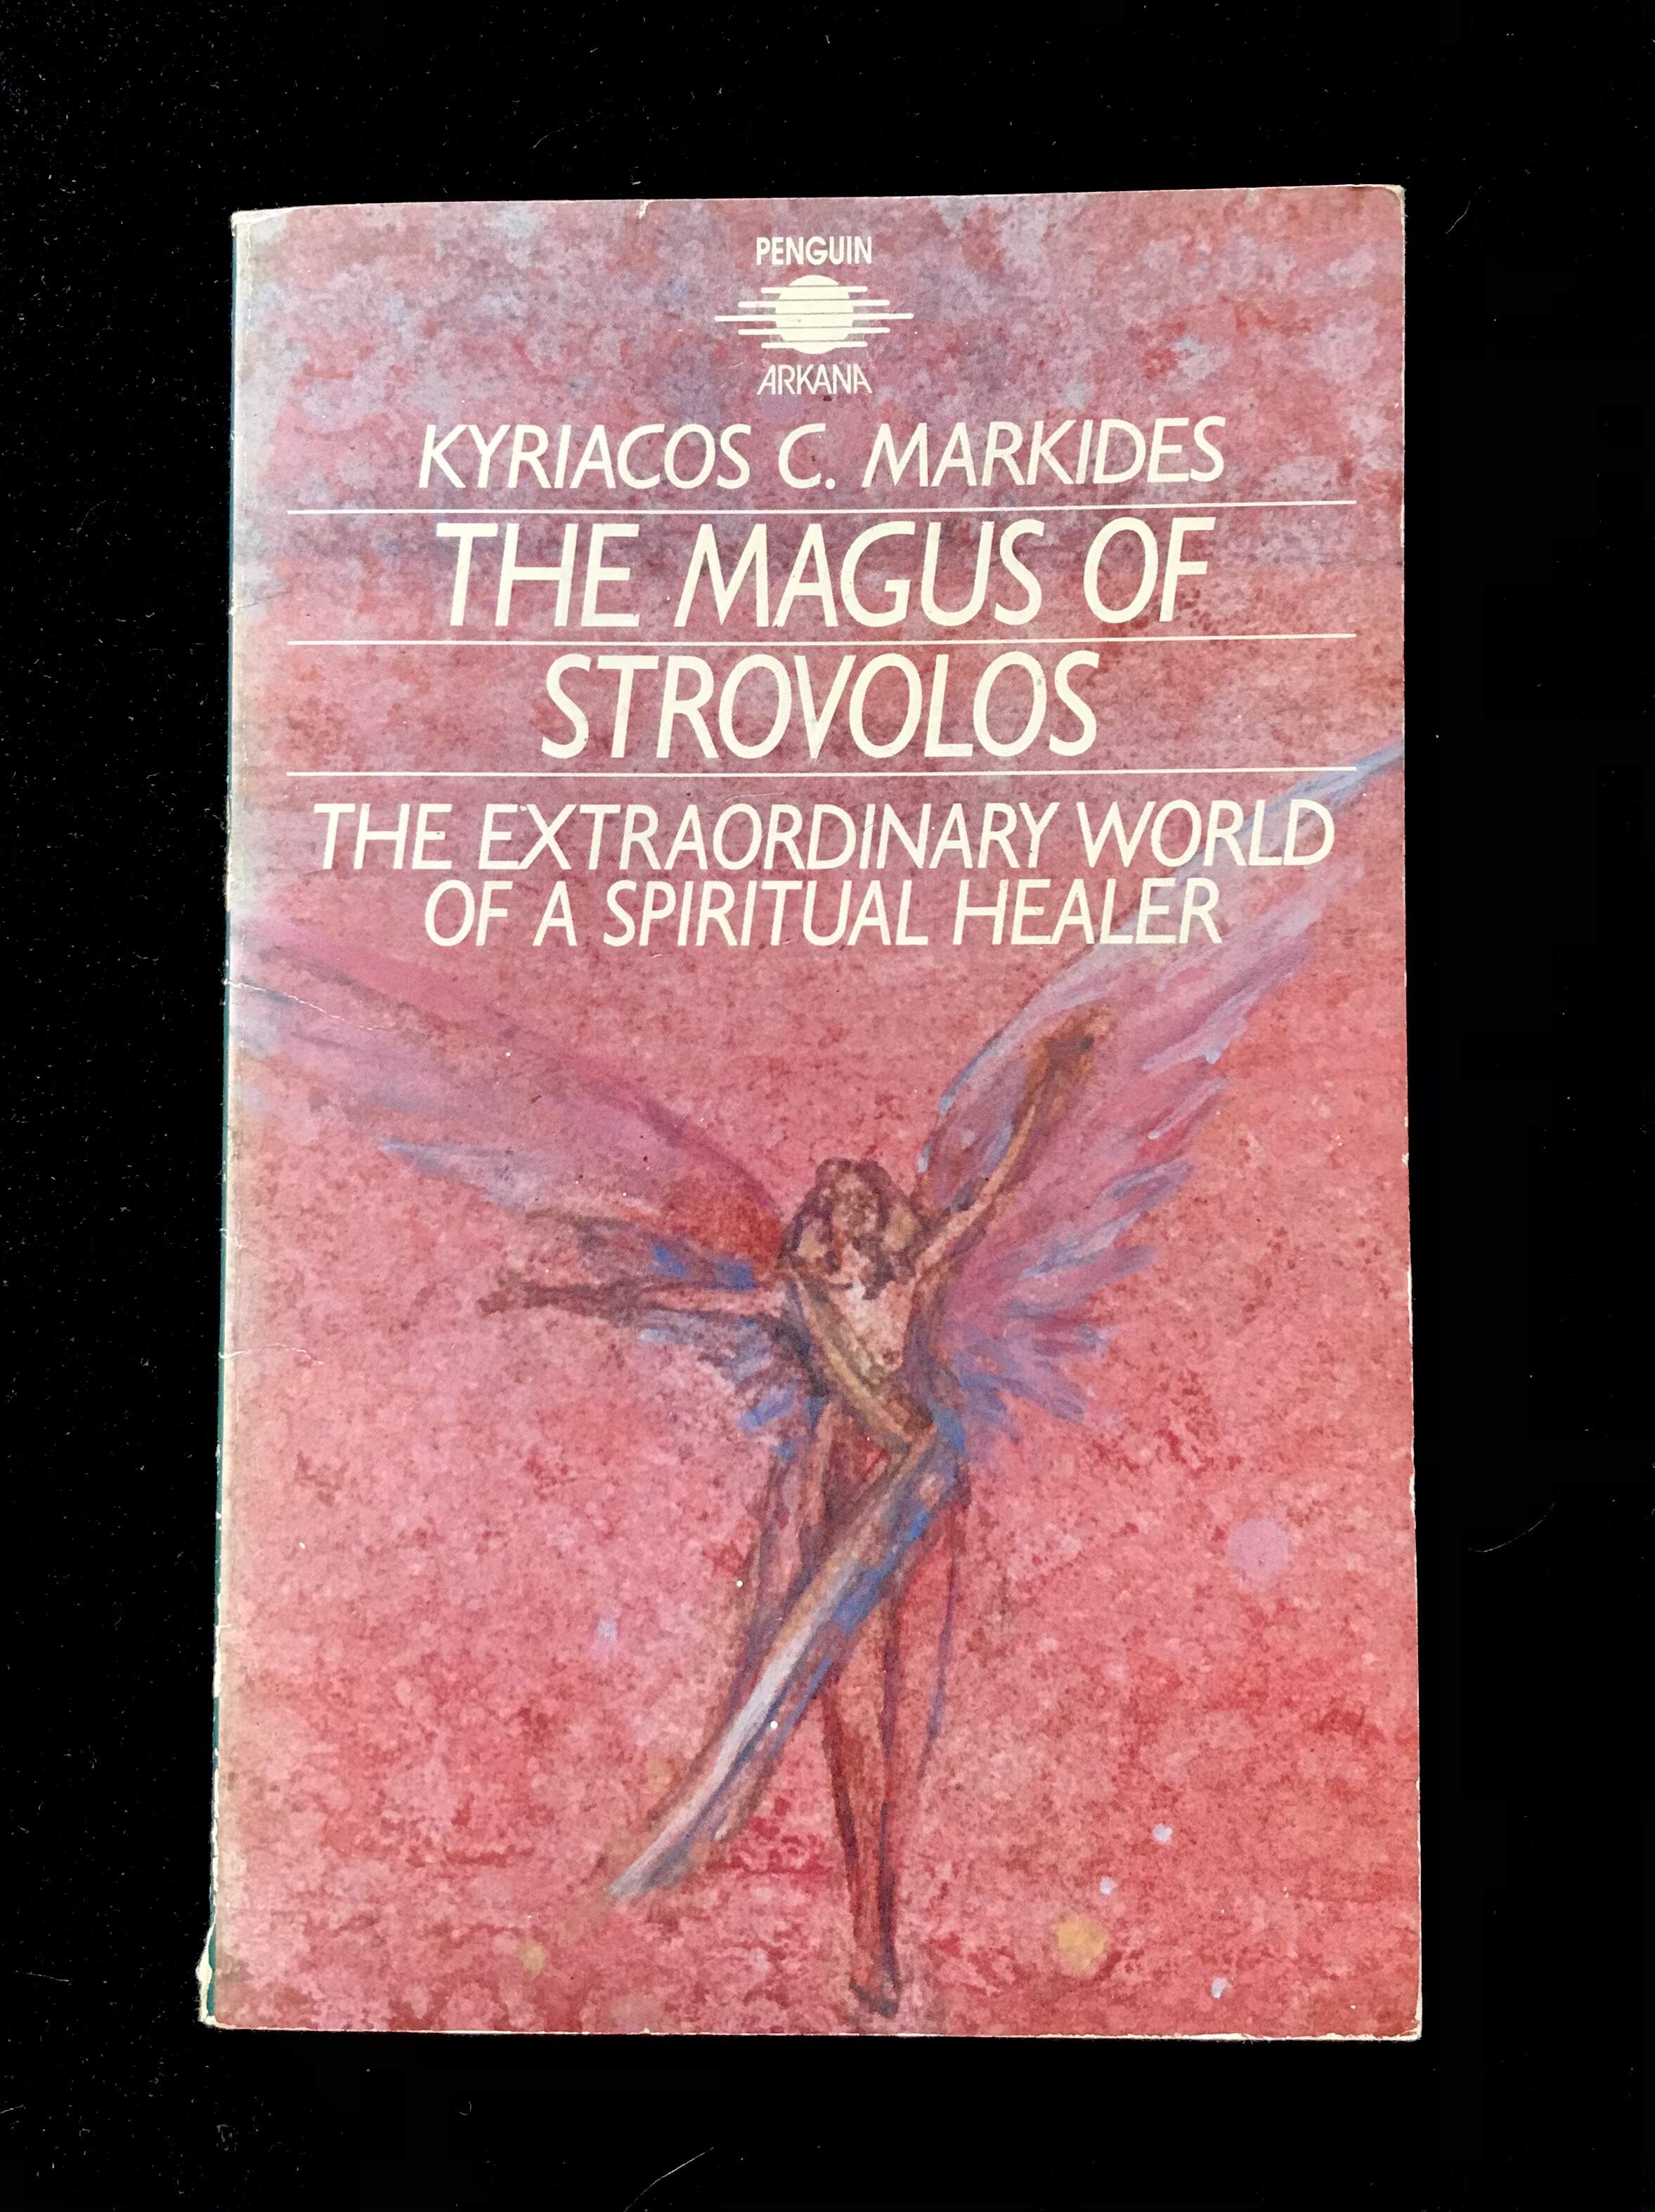 The Magus of Strovolos: The Extraordinary World of a Spiritual Healer by Kyriacos C. Markides